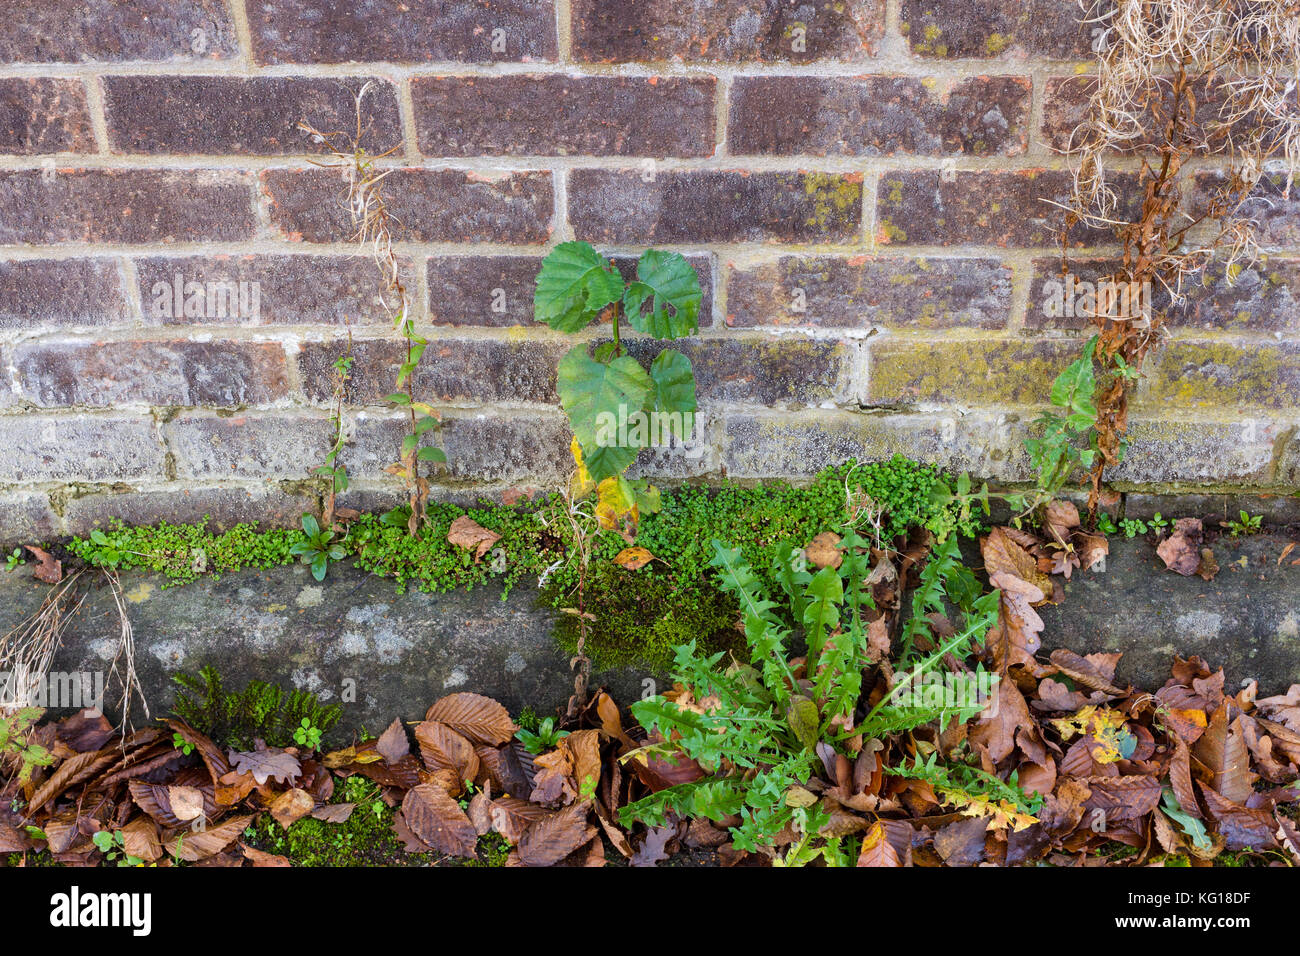 Weeds growing by a brick wall amongst fallen autumn leaves Stock Photo